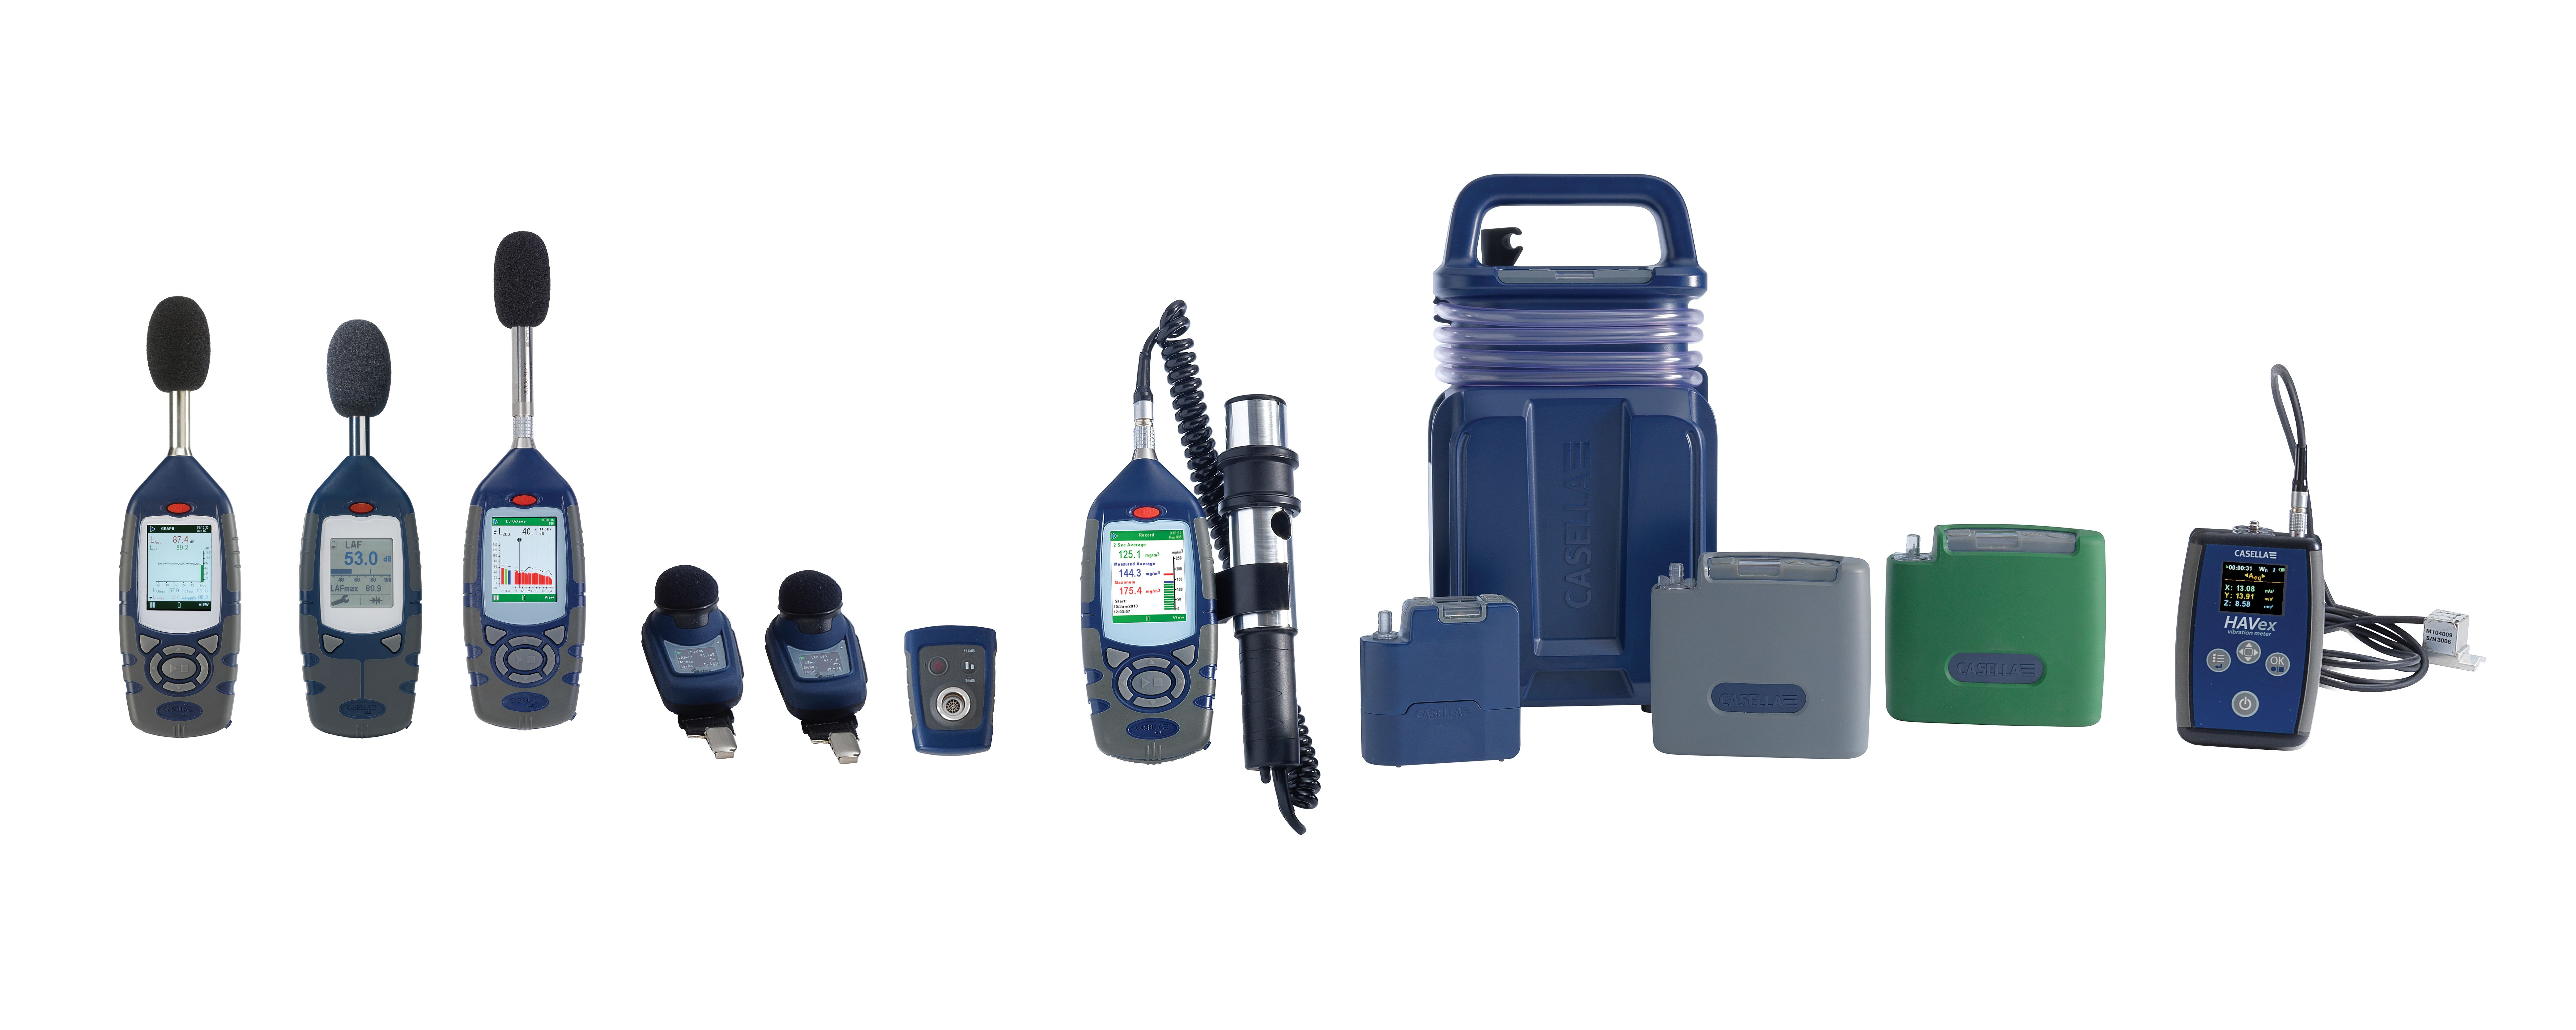 Casella to Showcase its Innovative Range of Air Sampling Pumps at The Health & Safety Event